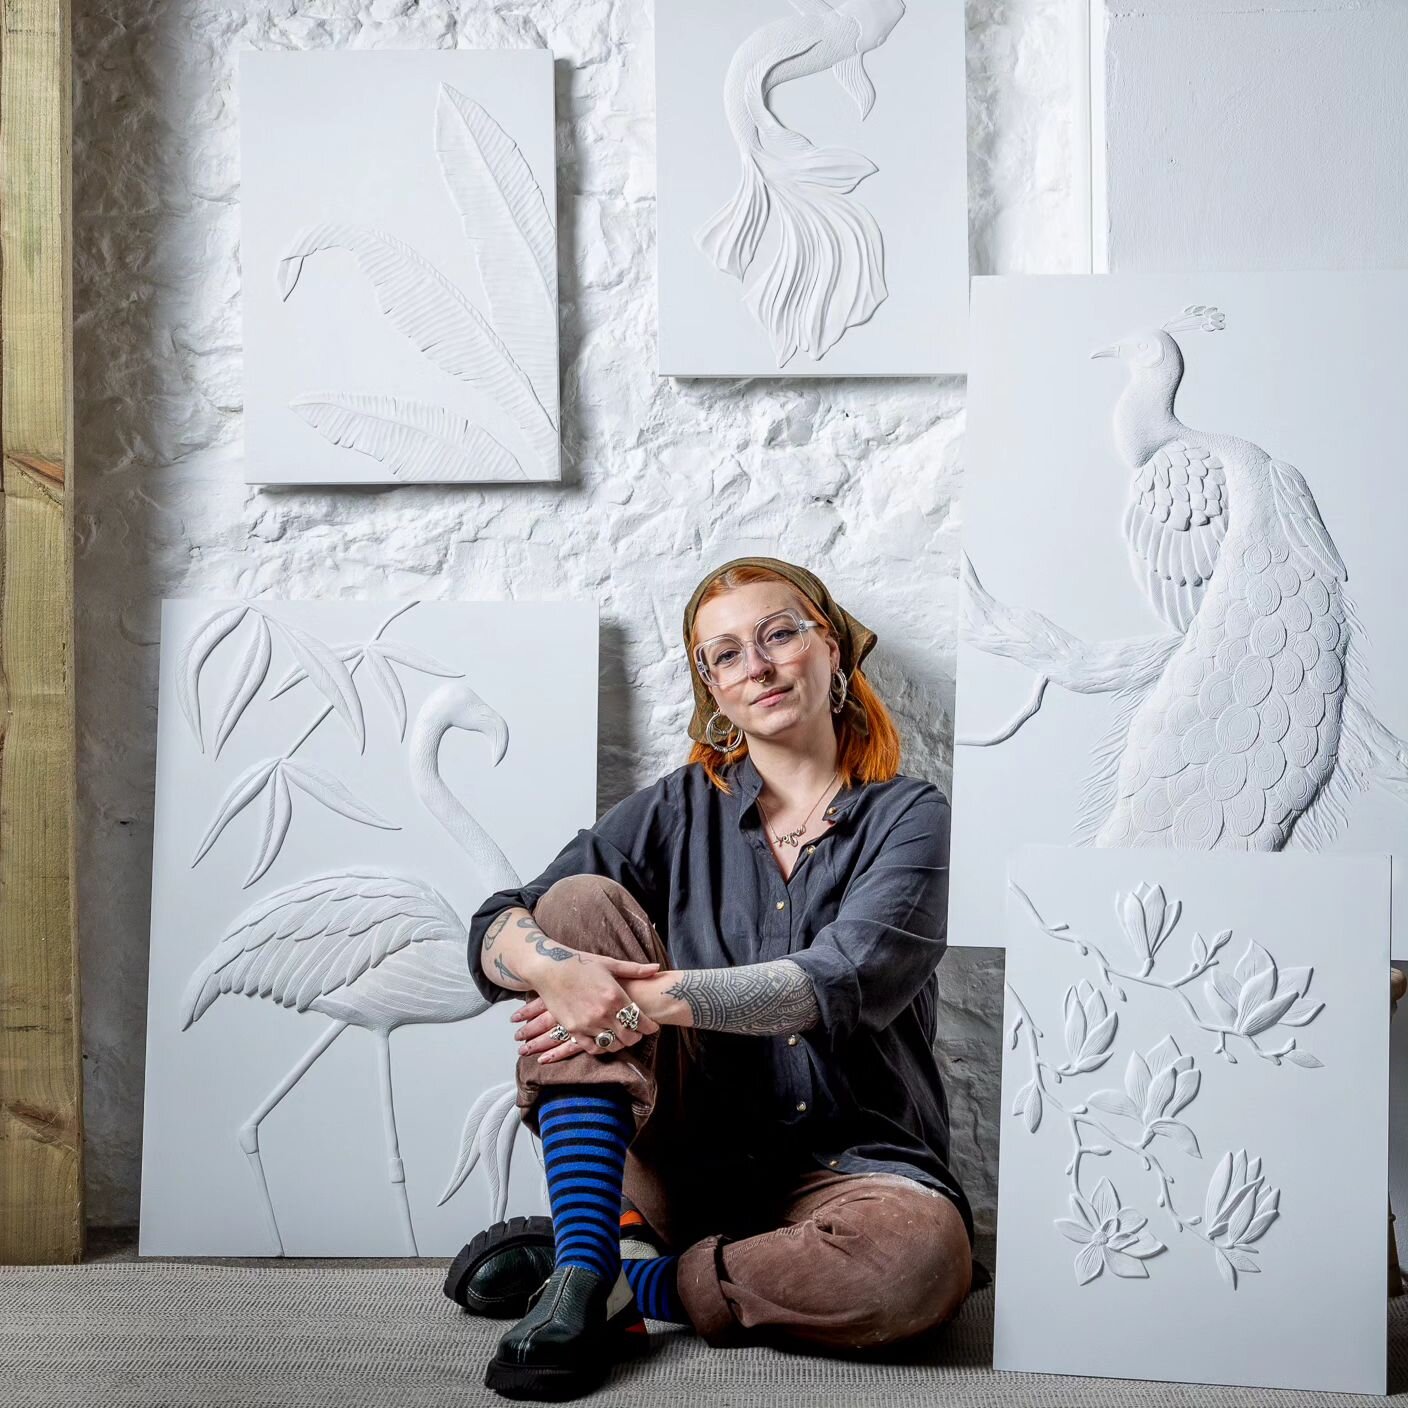 Absolutely chuffed with this fab portrait of me with some of my sculptural artworks, taken by @julian_winslow for this month's @style_ofwight magazine ✨ Pick up a copy and flick to the 'Meet the Maker' feature to read a bit about me, my work, and my 